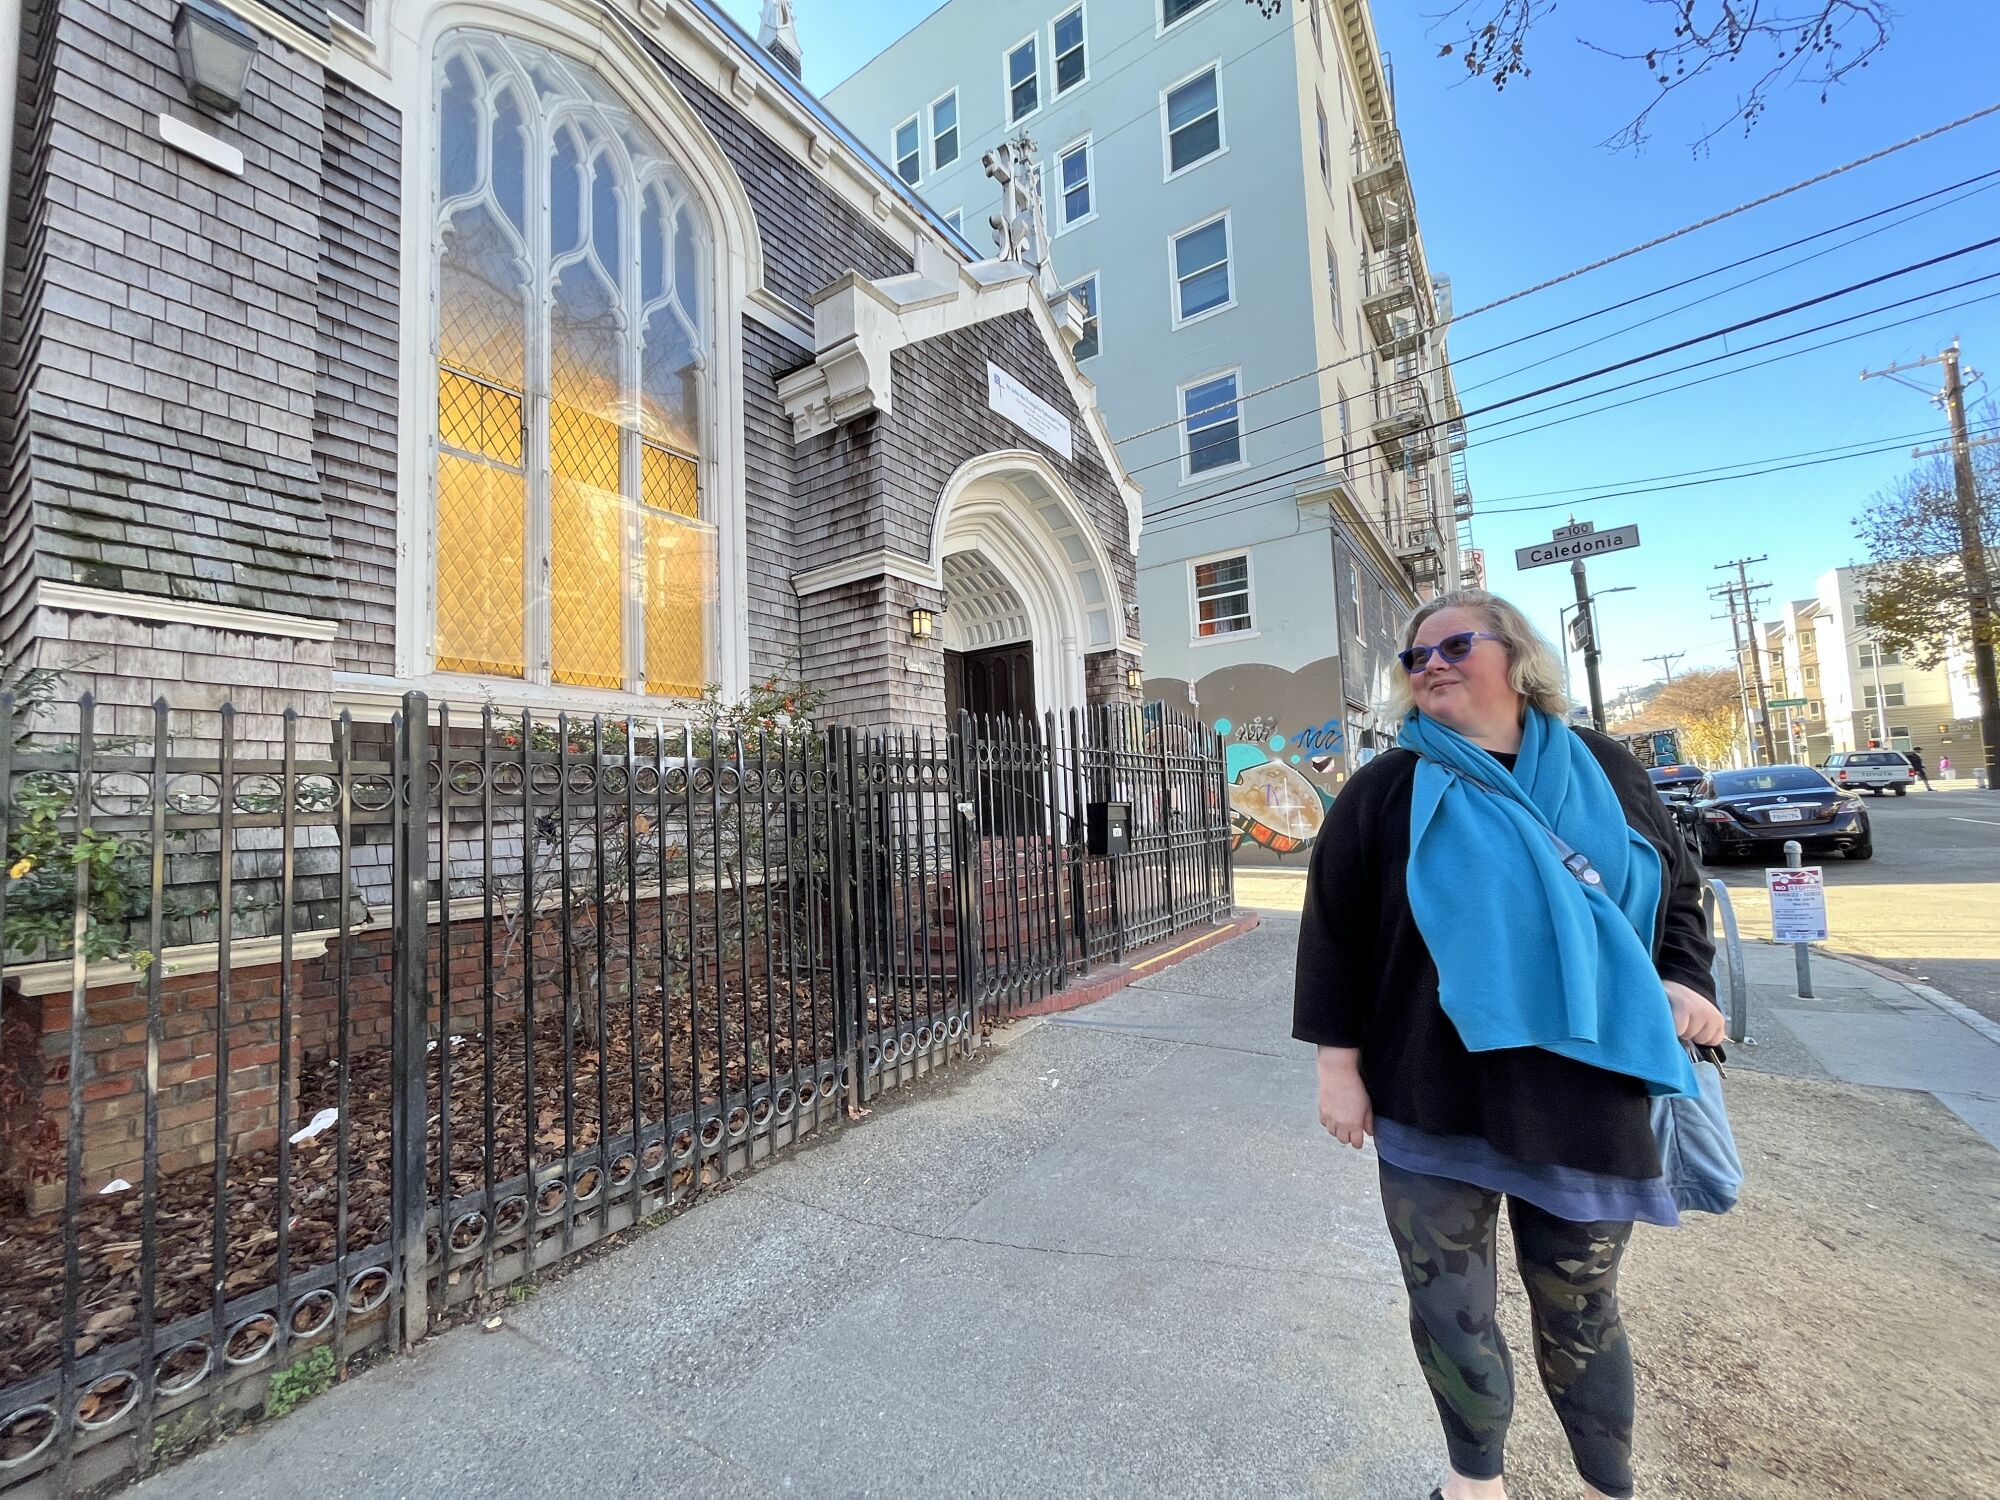 Lydia Bransten stands in front of St. John the Evangelist church in San Francisco's Mission district